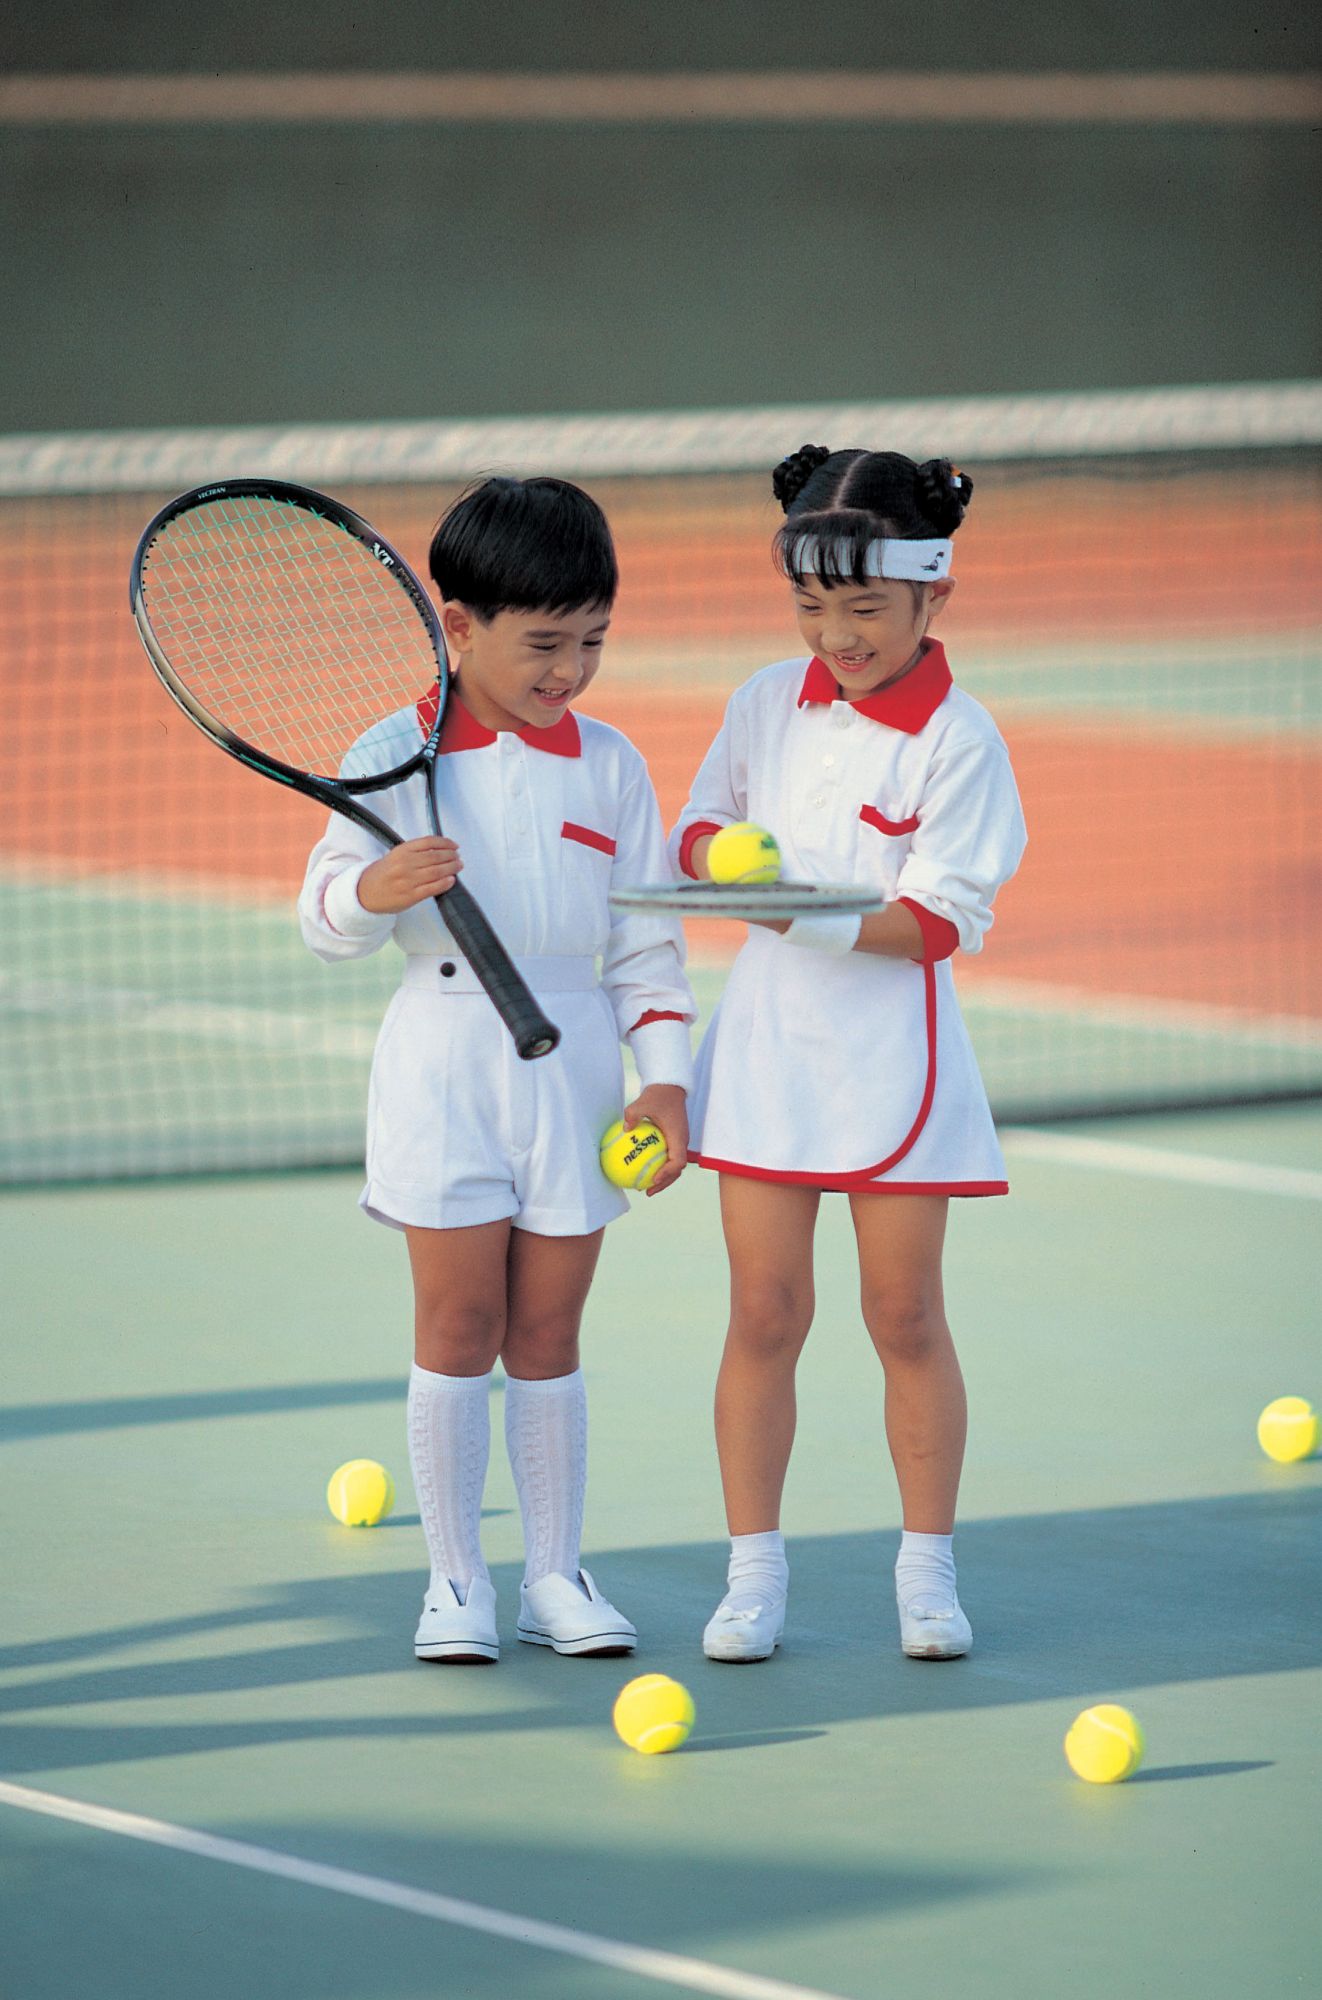 FD_Young_boy_and_girl_playing_tennis.jpg